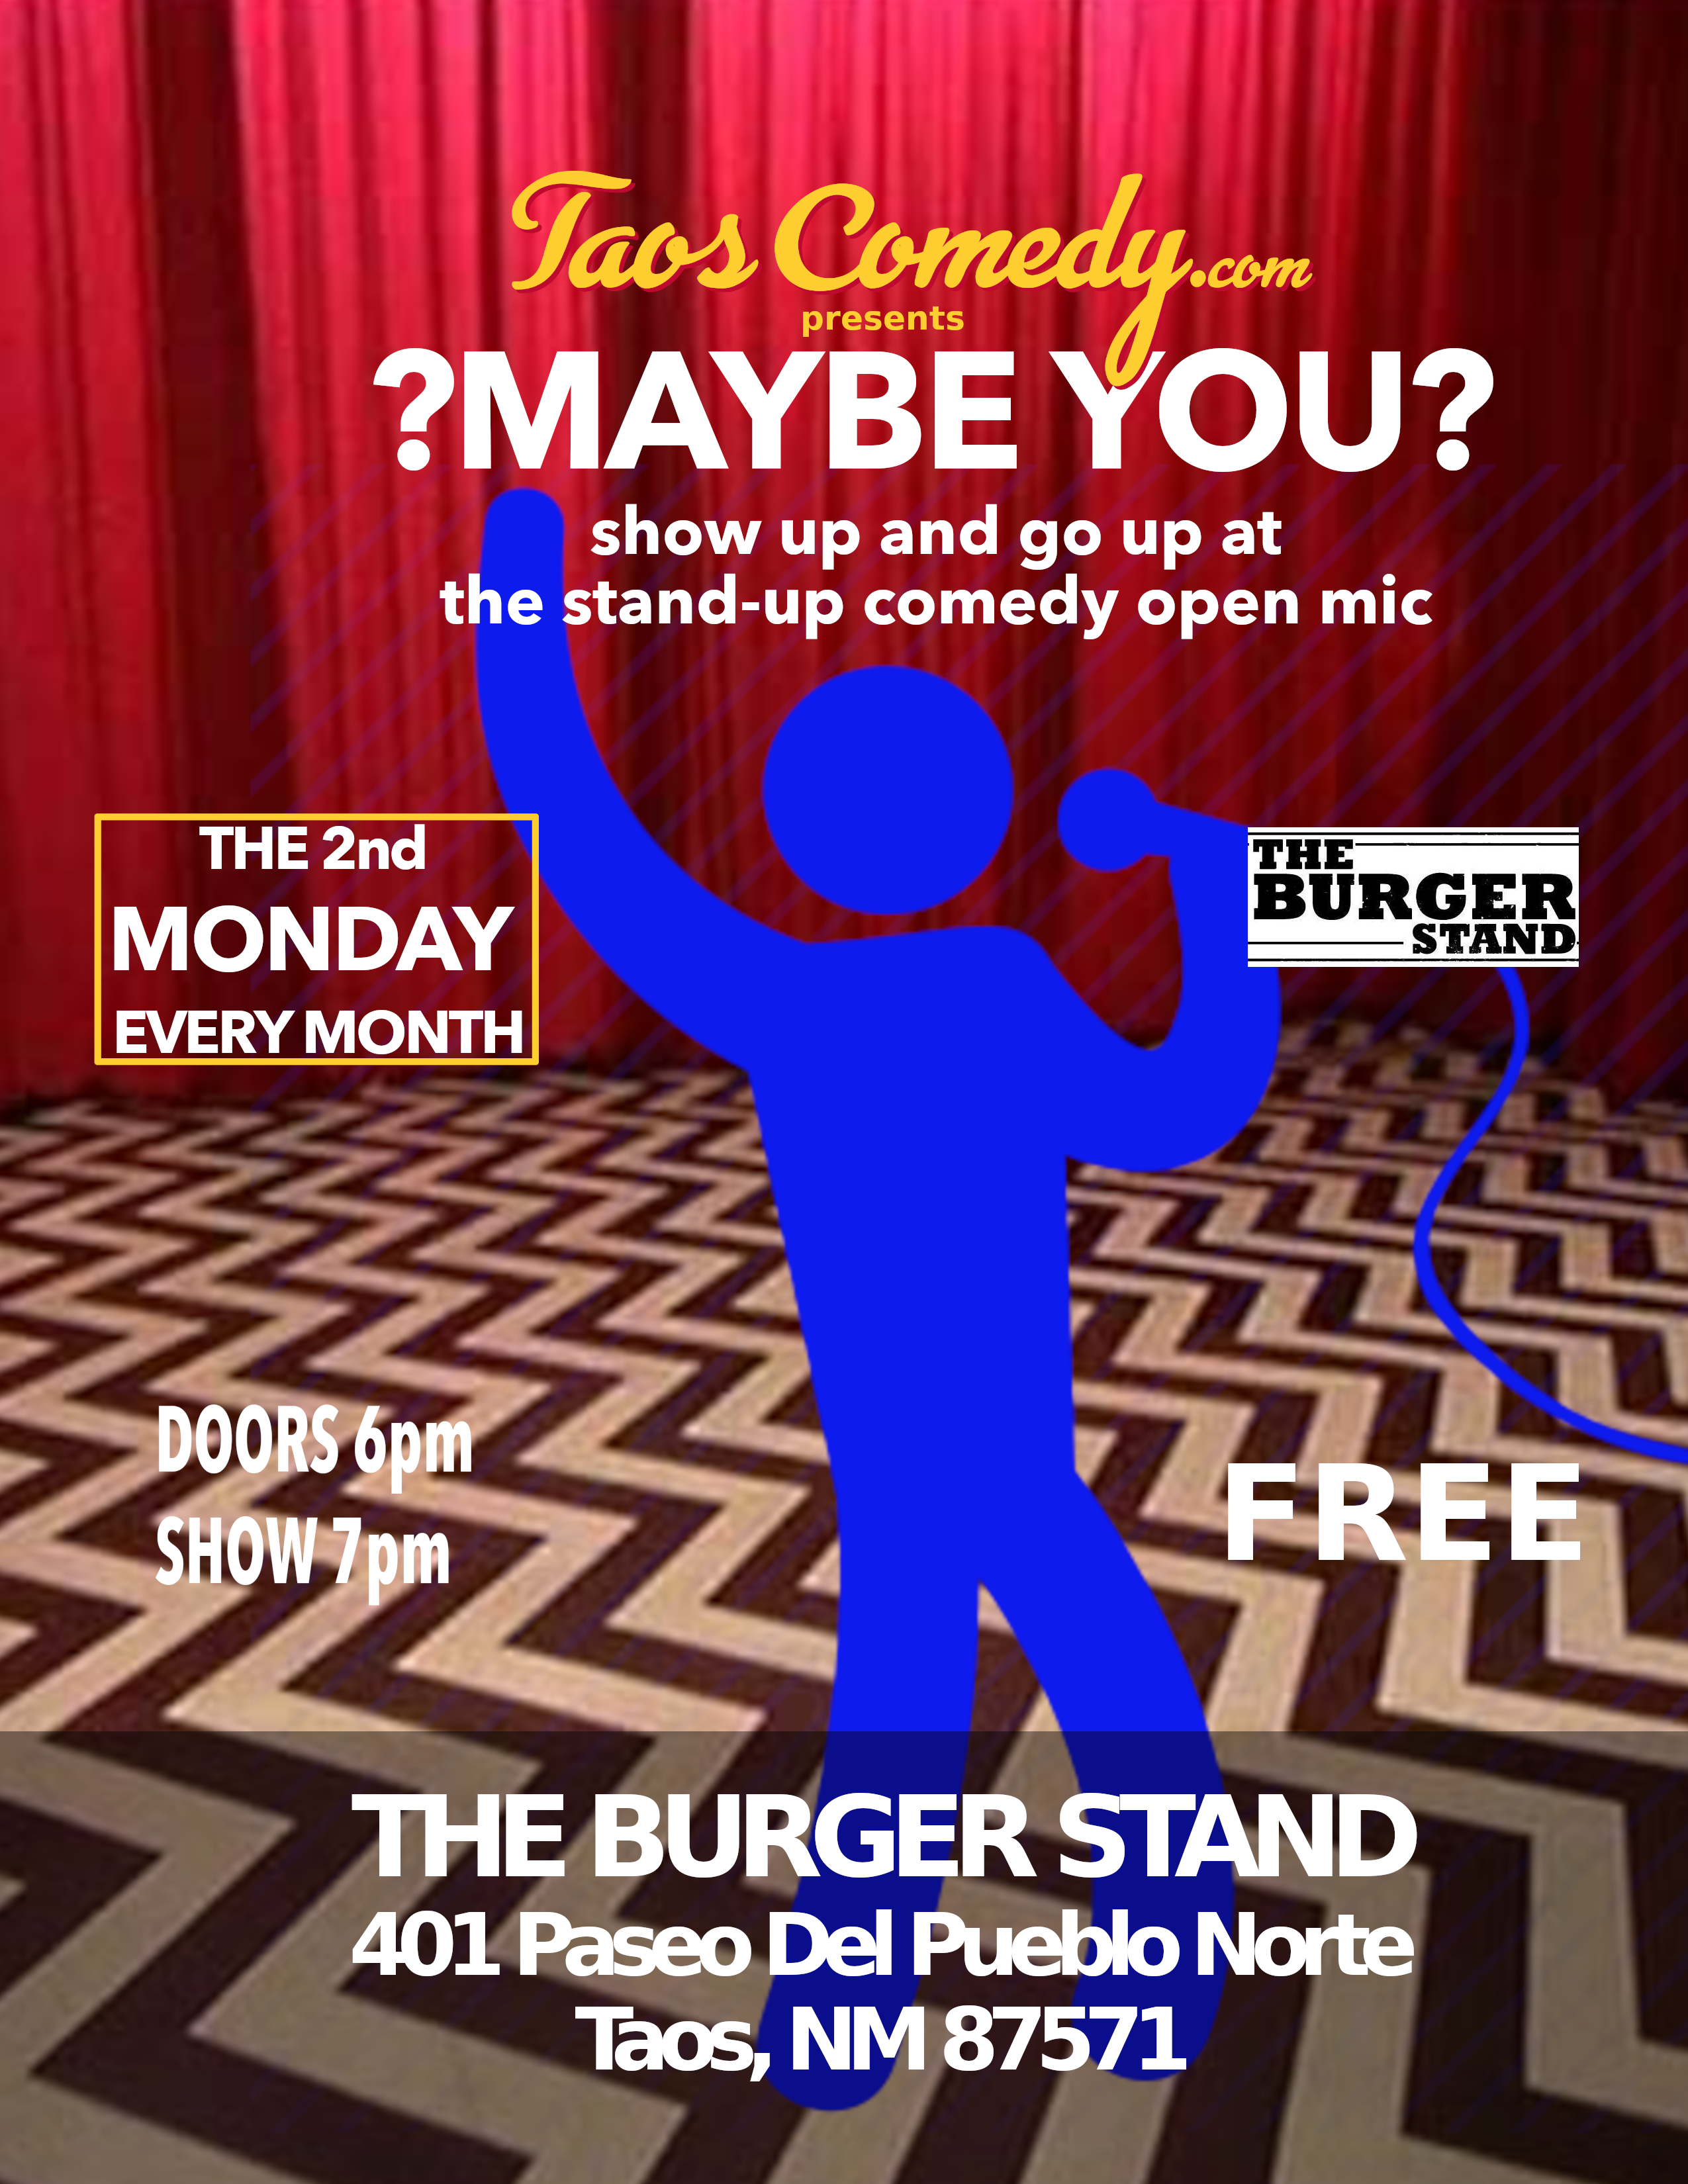 OPEN MIC stand-up comedy at The Burger Stand the 2nd Monday of every month.